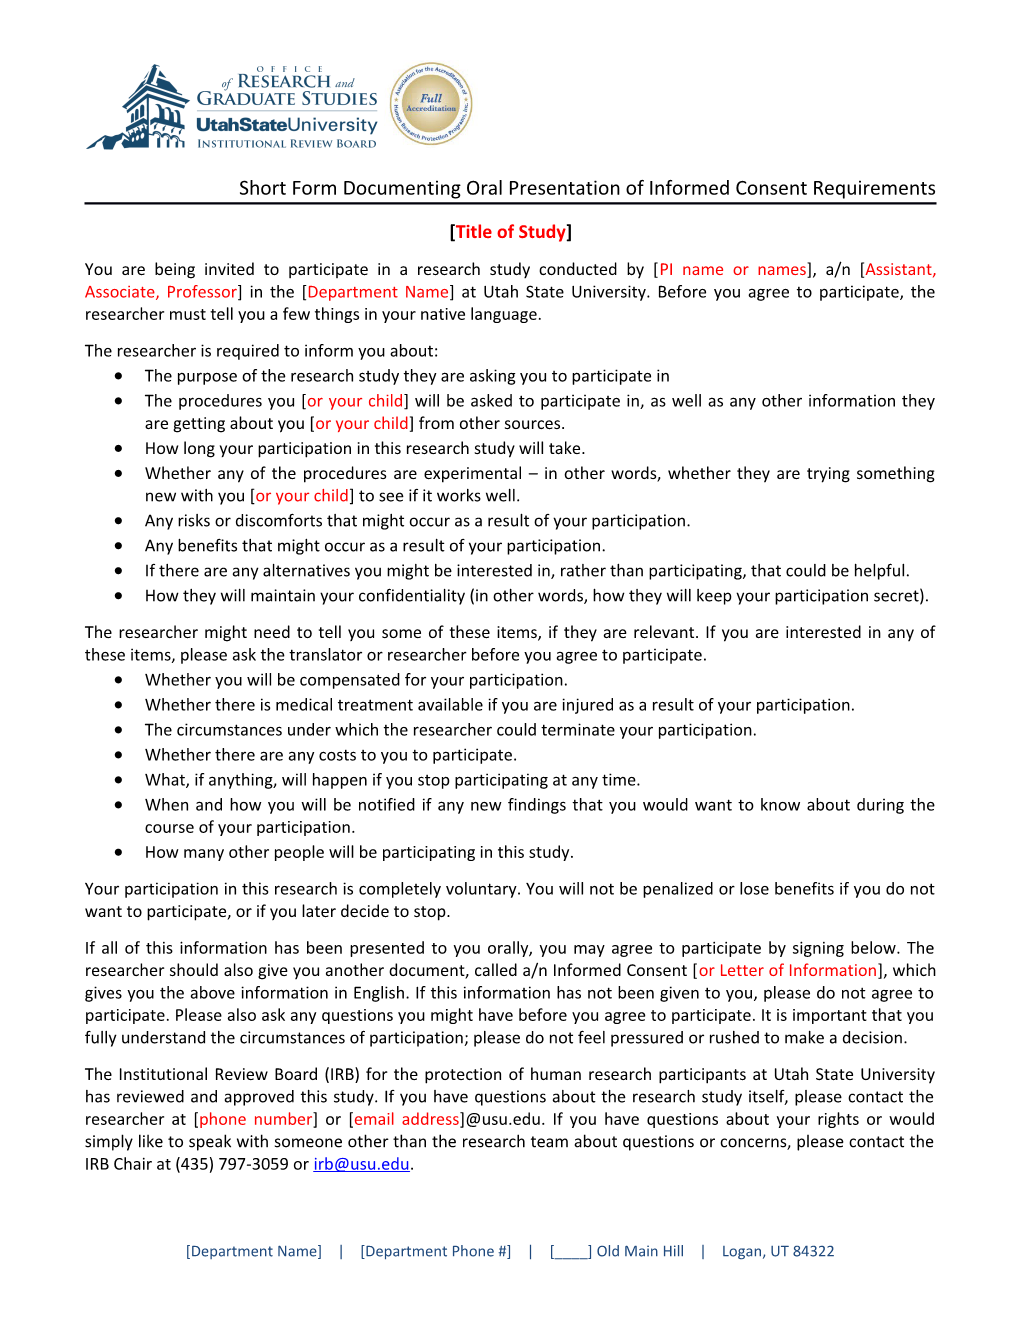 Short Form Documenting Oral Presentation of Informed Consent Requirements